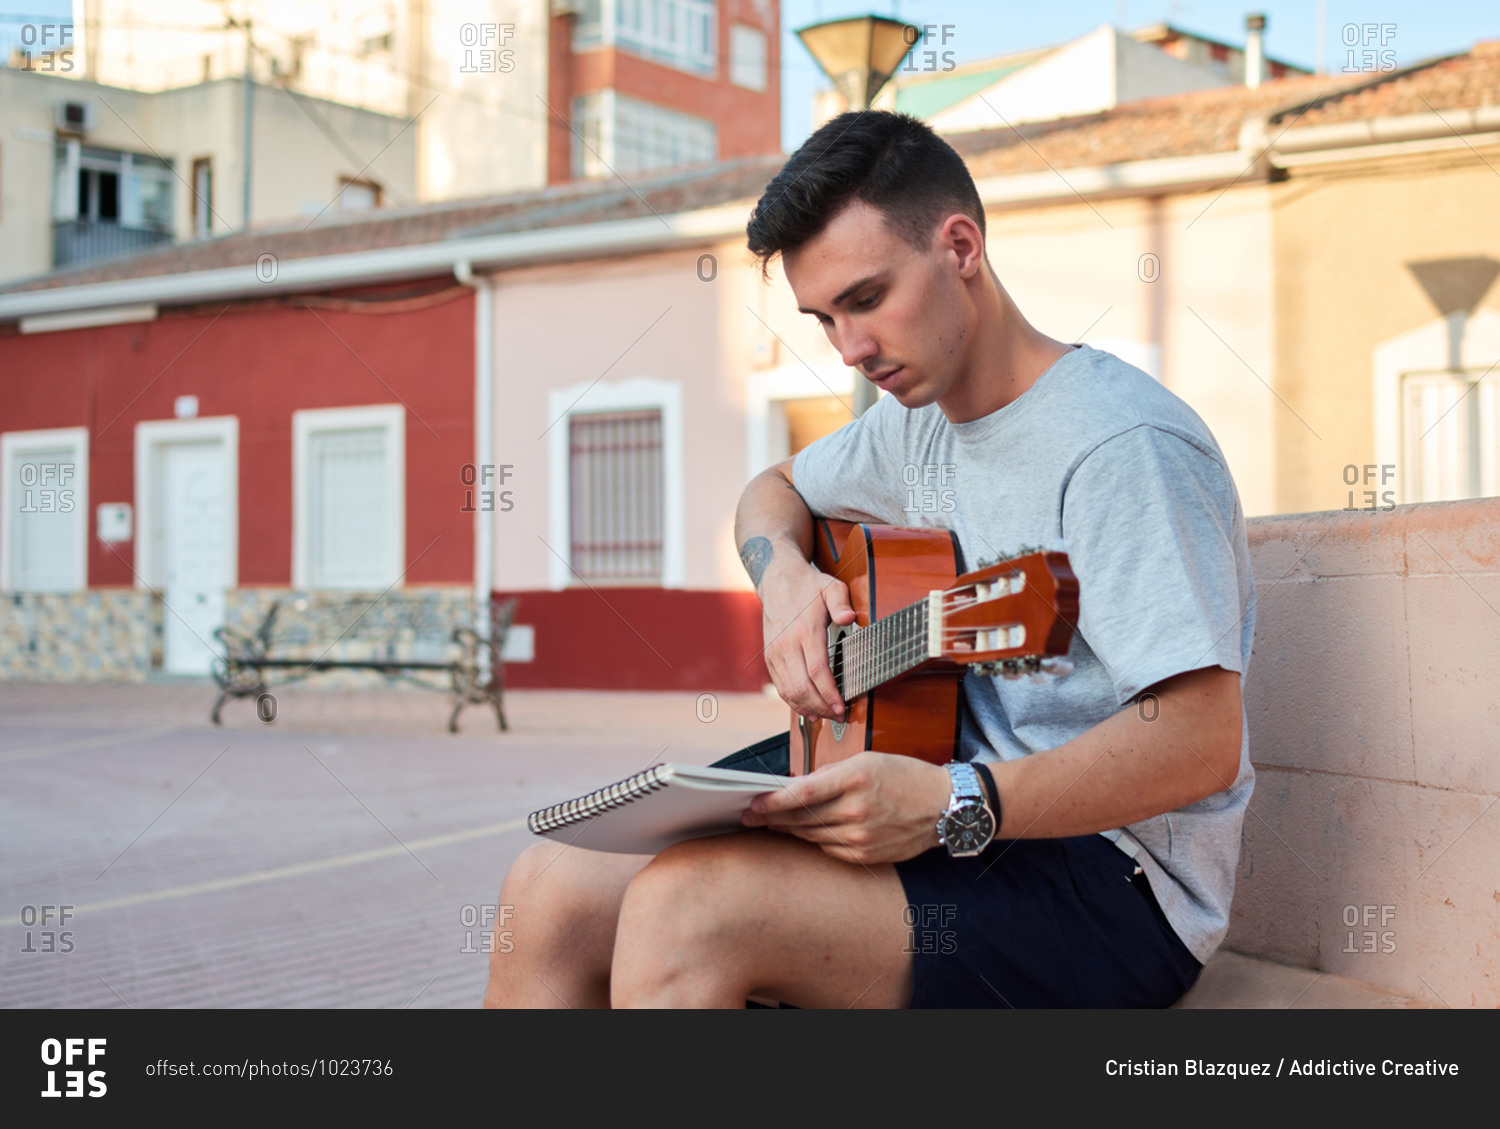 Creative male musician sitting on stone bench on street and reading notes while preparing for playing guitar